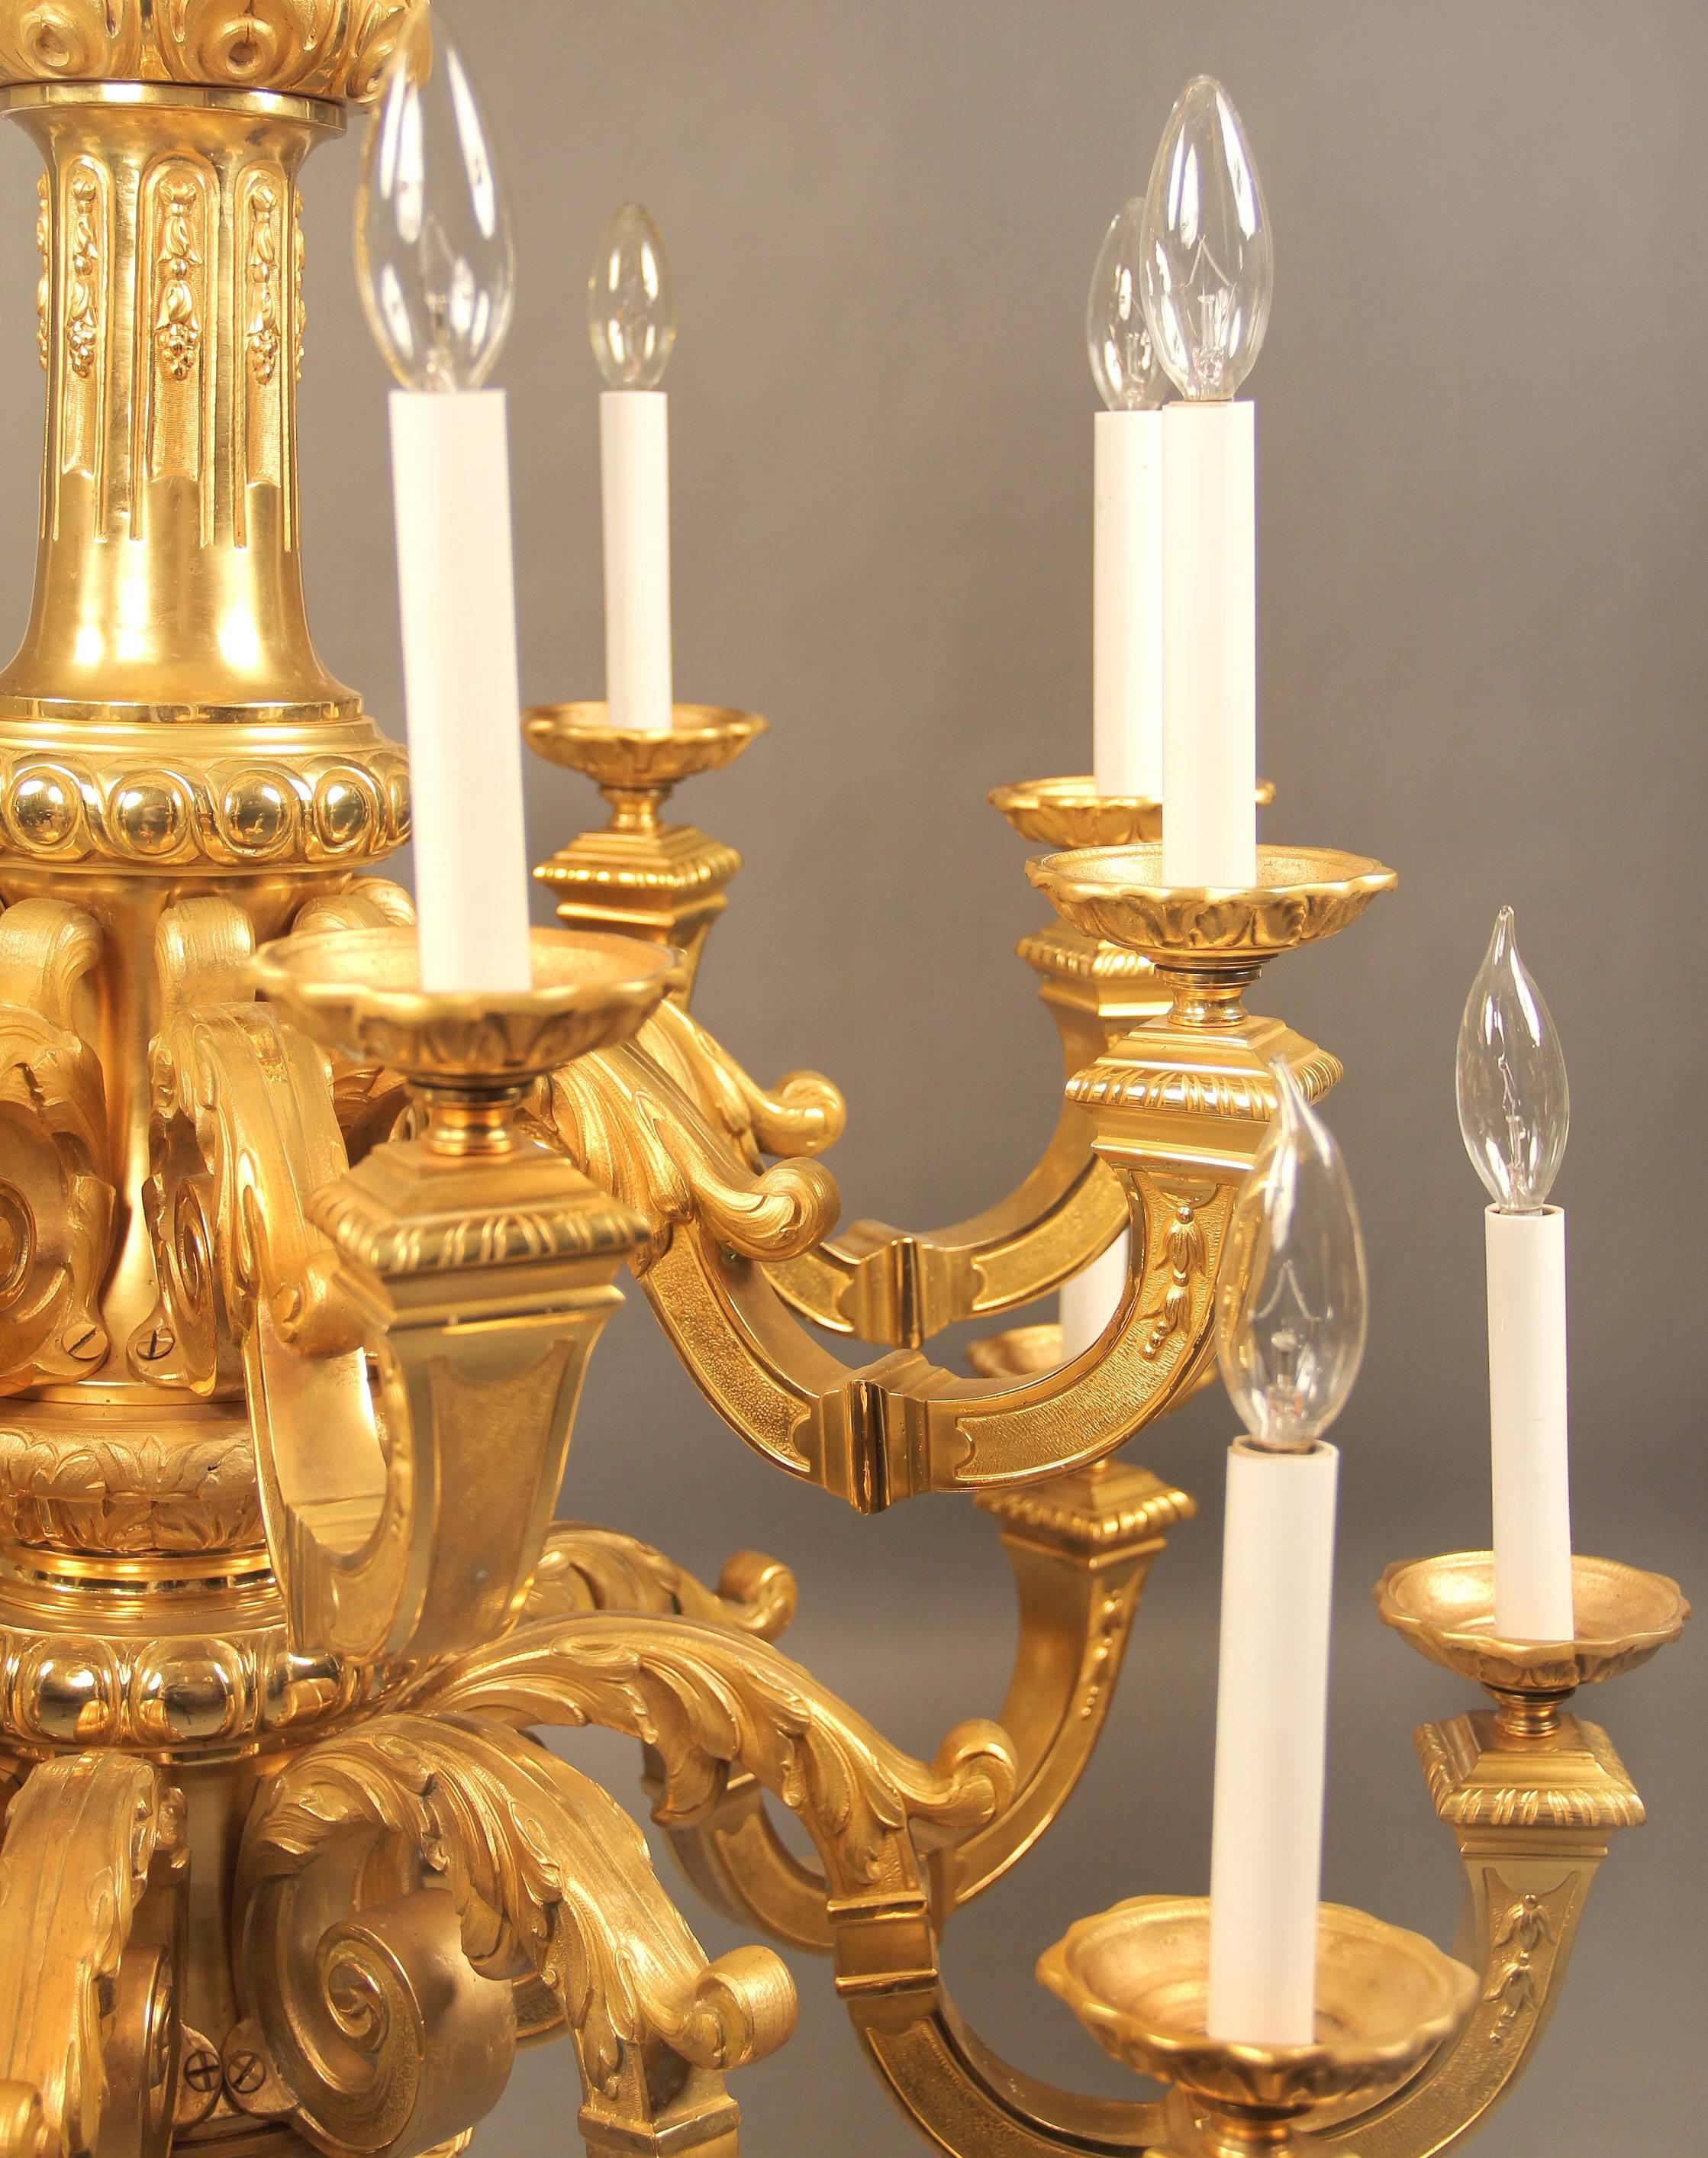 An important and nice quality late 19th century gilt bronze sixteen-light chandelier.

A large all bronze casted frame with sixteen tiered lit arms, each with acanthus leaf designs. The top adorned with four women heads.

If you are looking for a